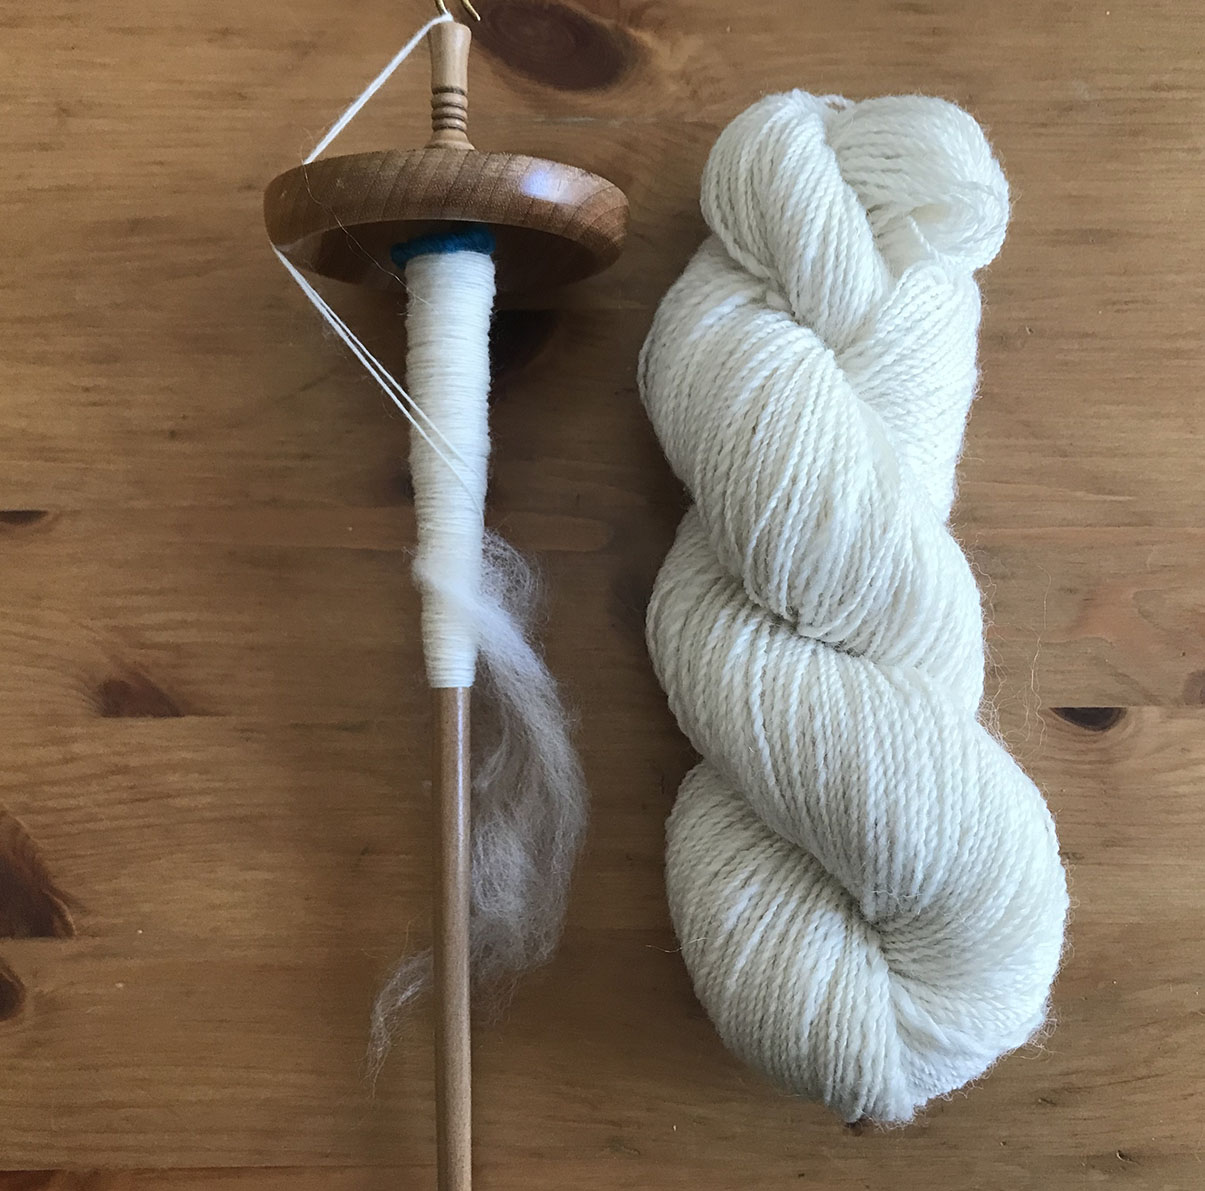 Adventures in spinning with drop spindles - Sticks & Scribbles